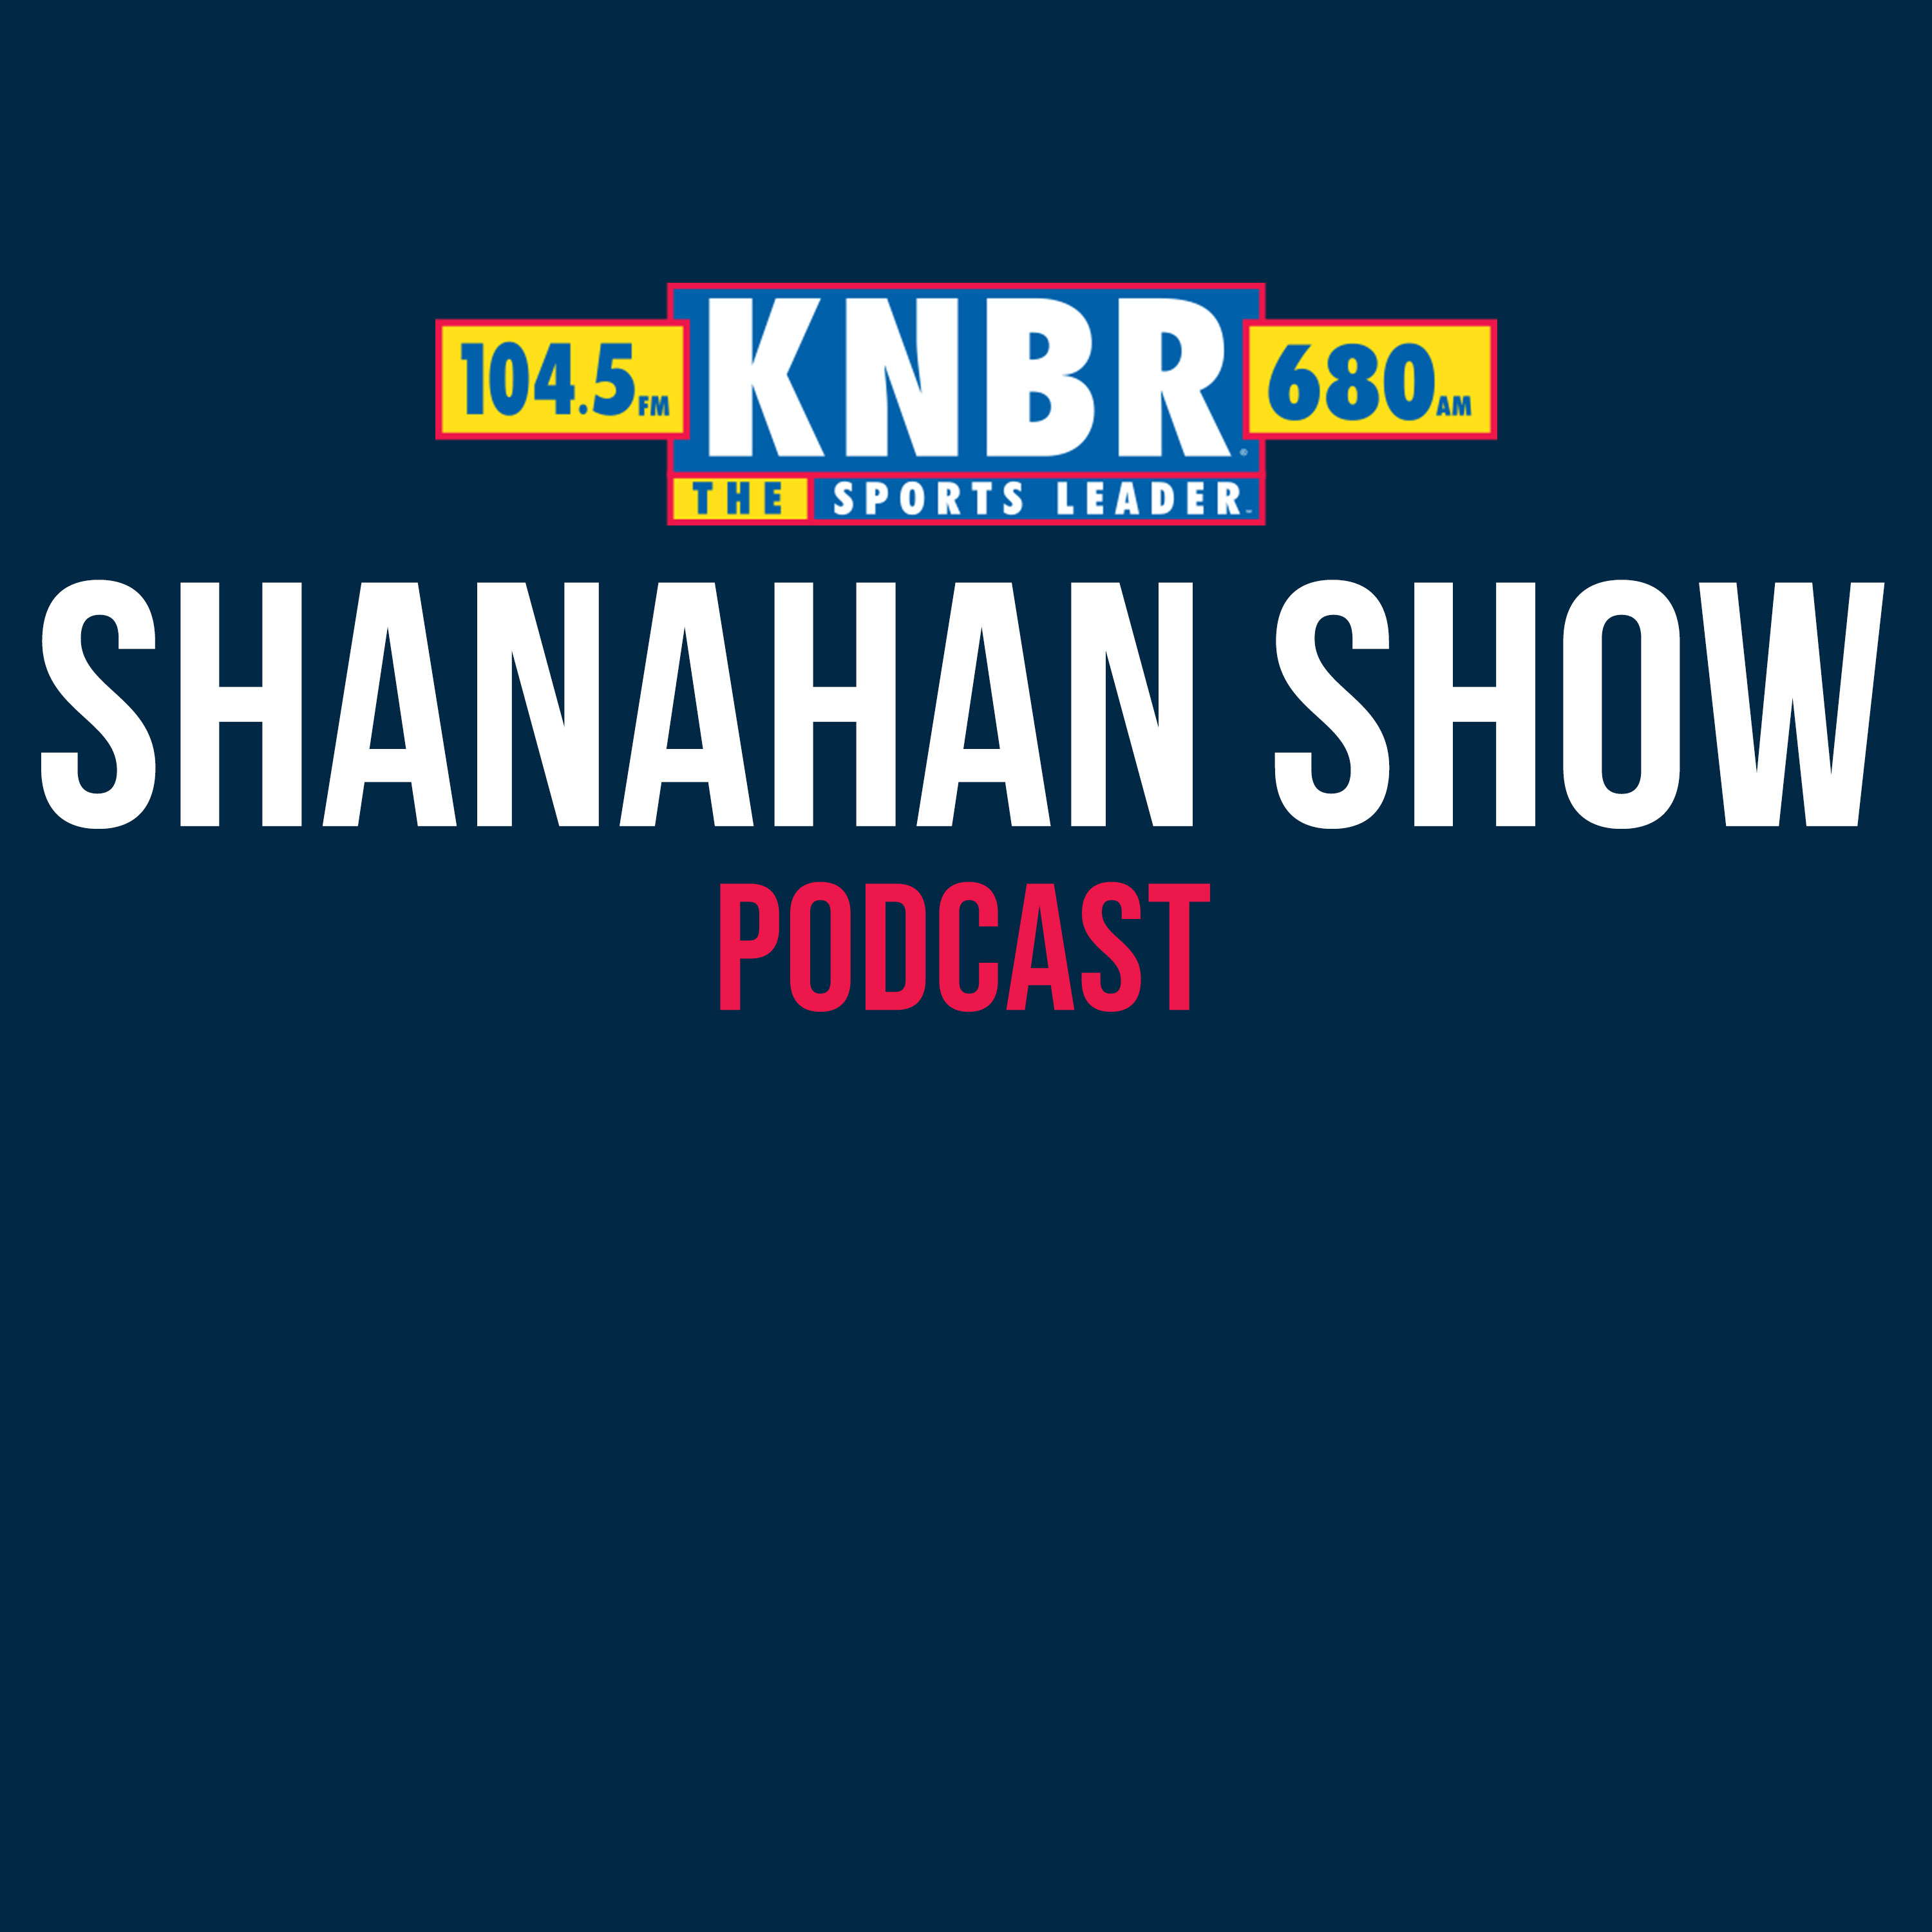 8-31 Kyle Shanahan joins Tolbert & Ratto to discuss trading away Trey Lance & when is too late for Nick Bosa to play Week 1